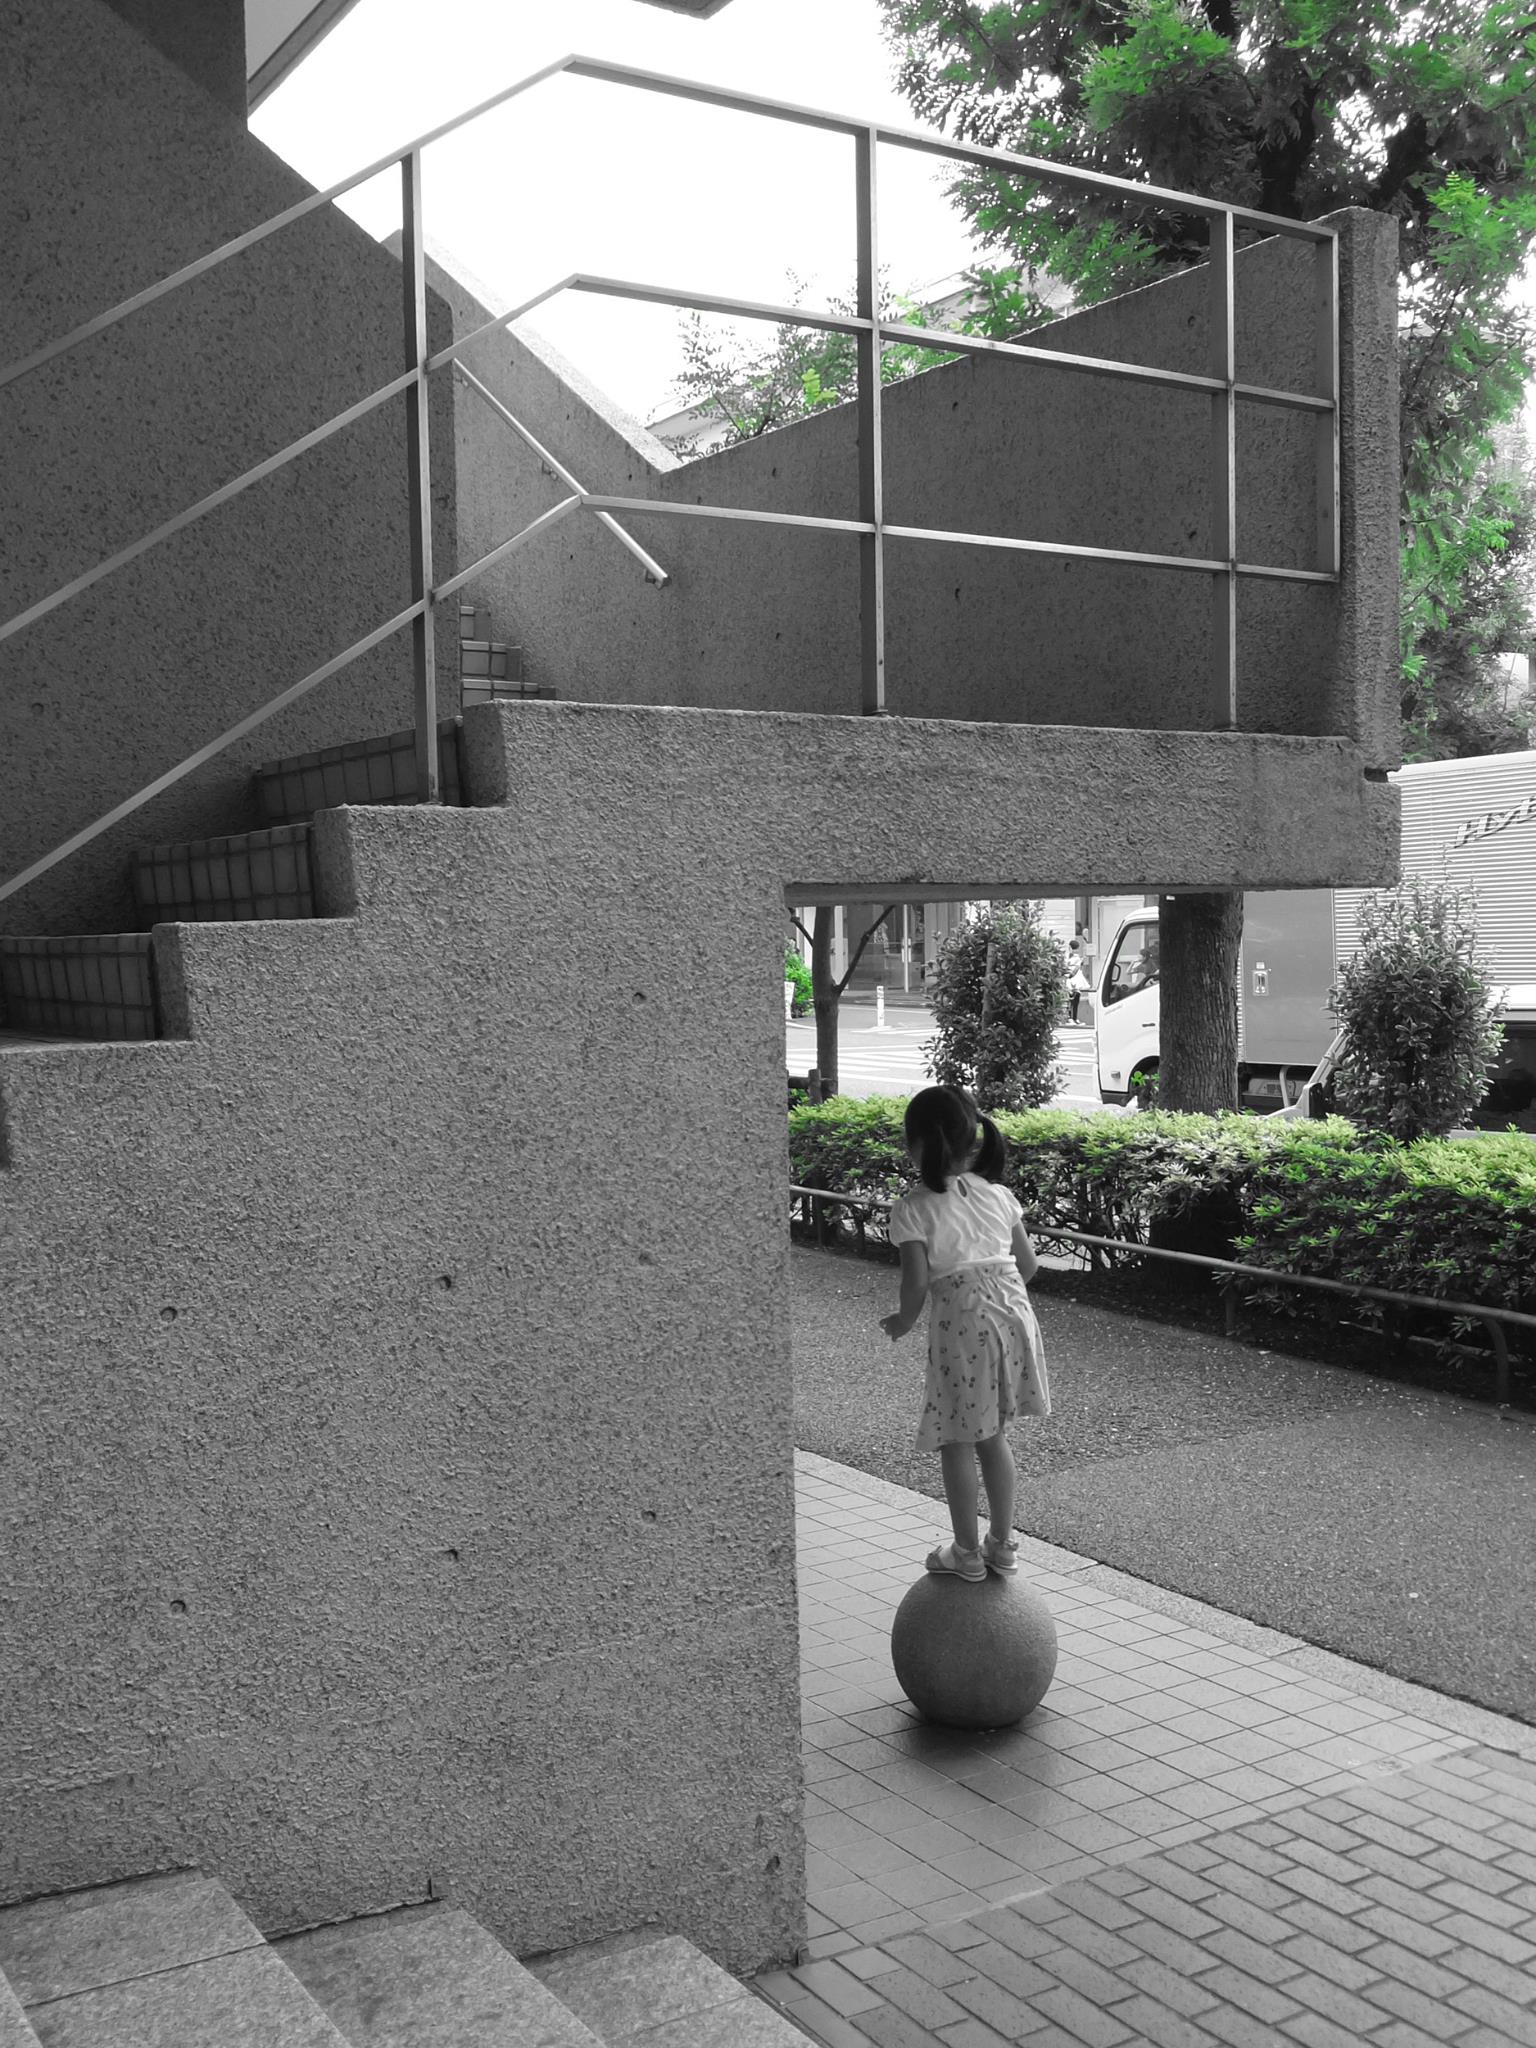 REVISITING TOYKO: AN ARCHITECTURAL PILGRIMAGE